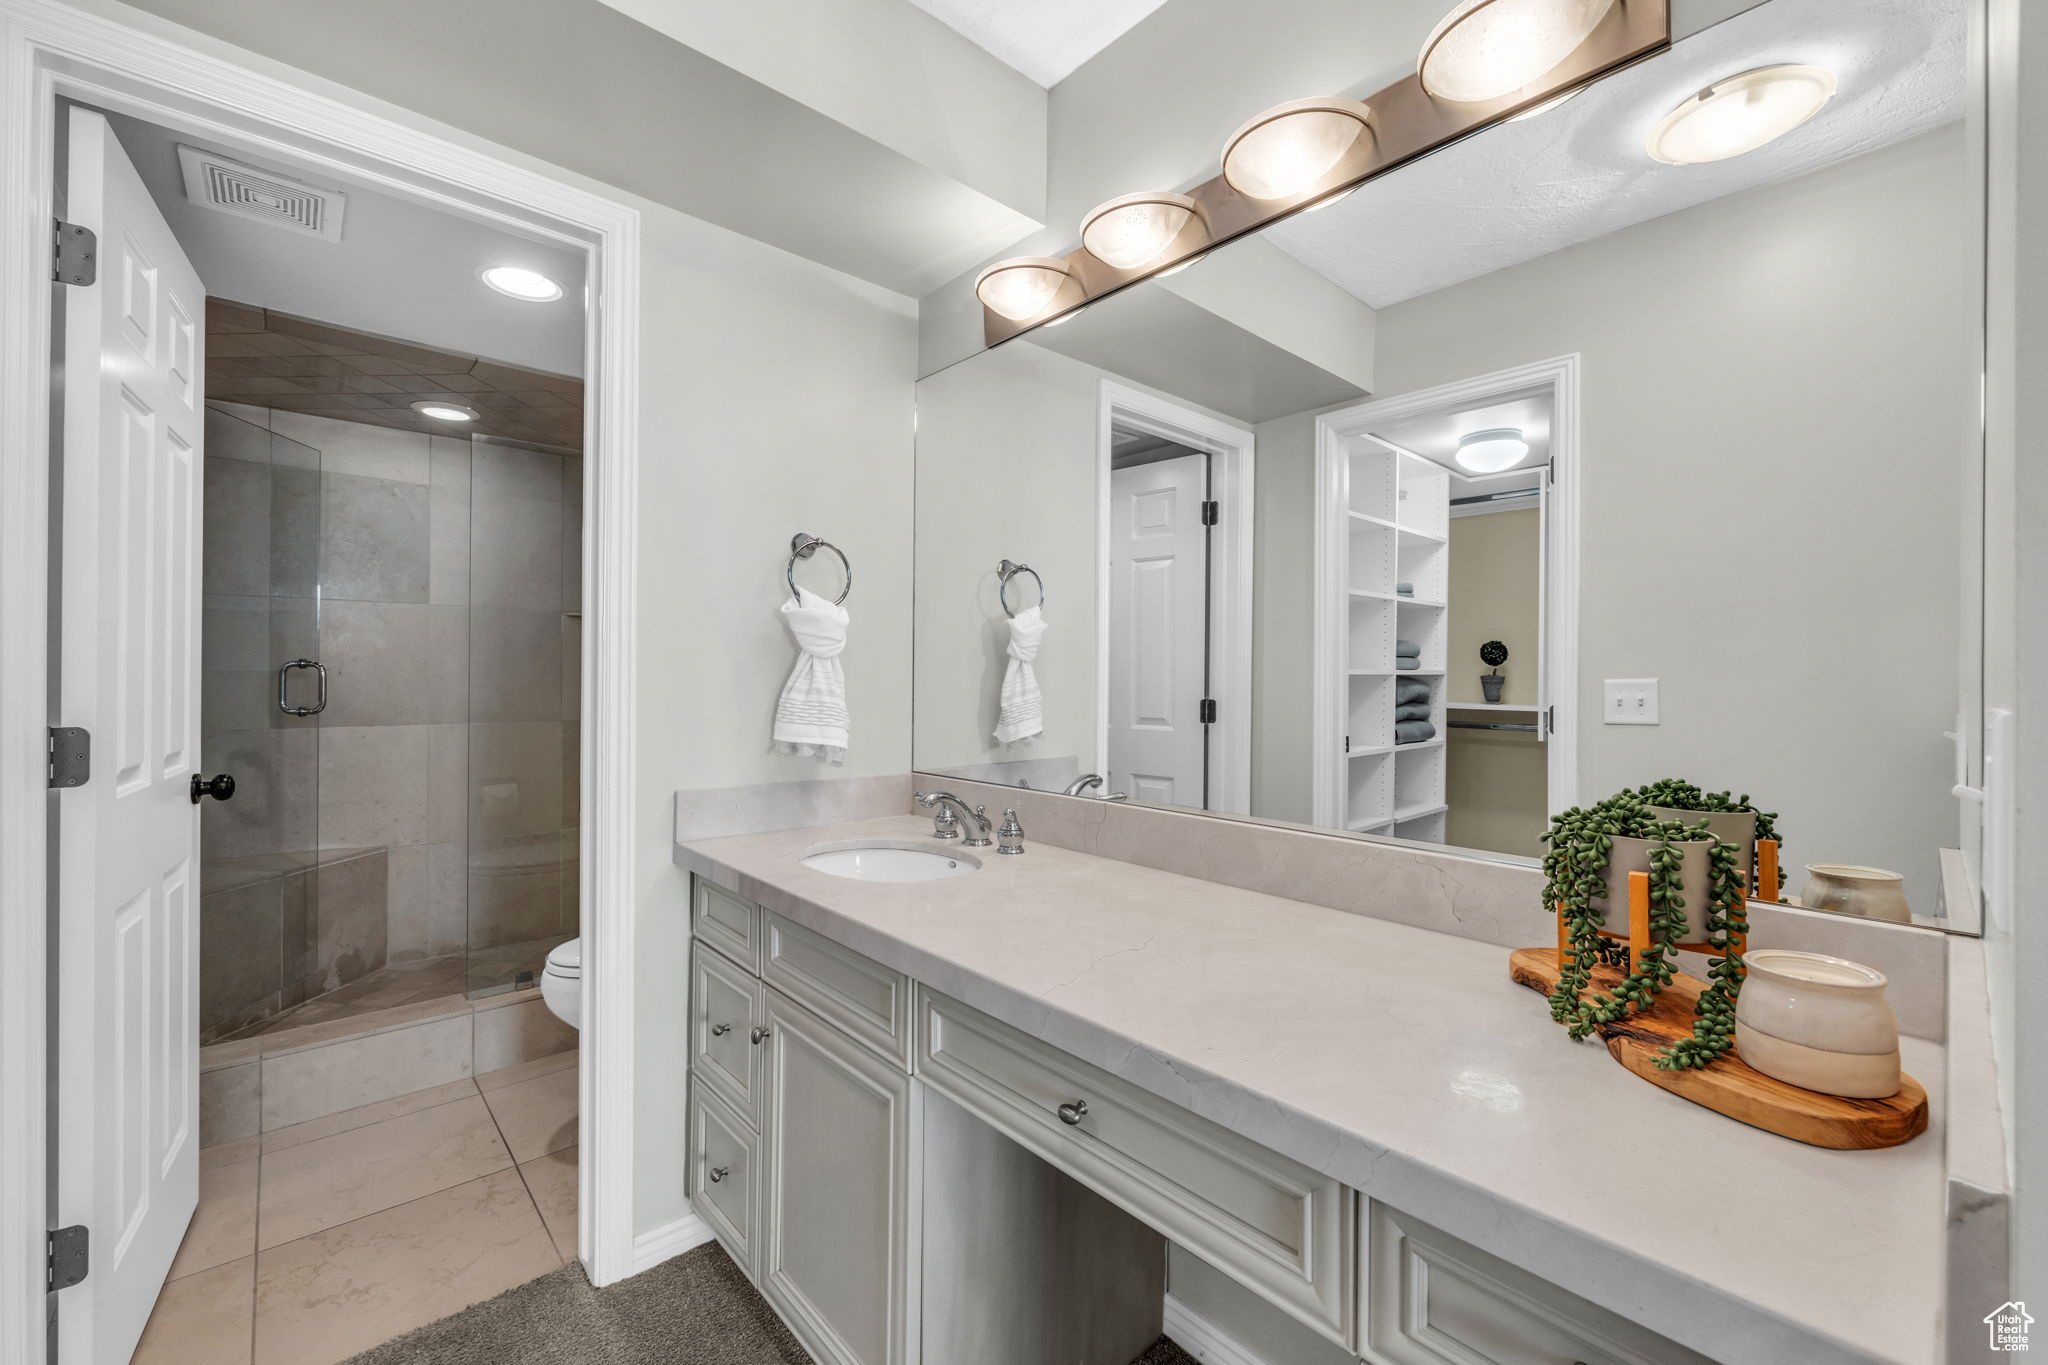 On suite bathroom with tile flooring, oversized vanity, toilet, and a shower with shower door